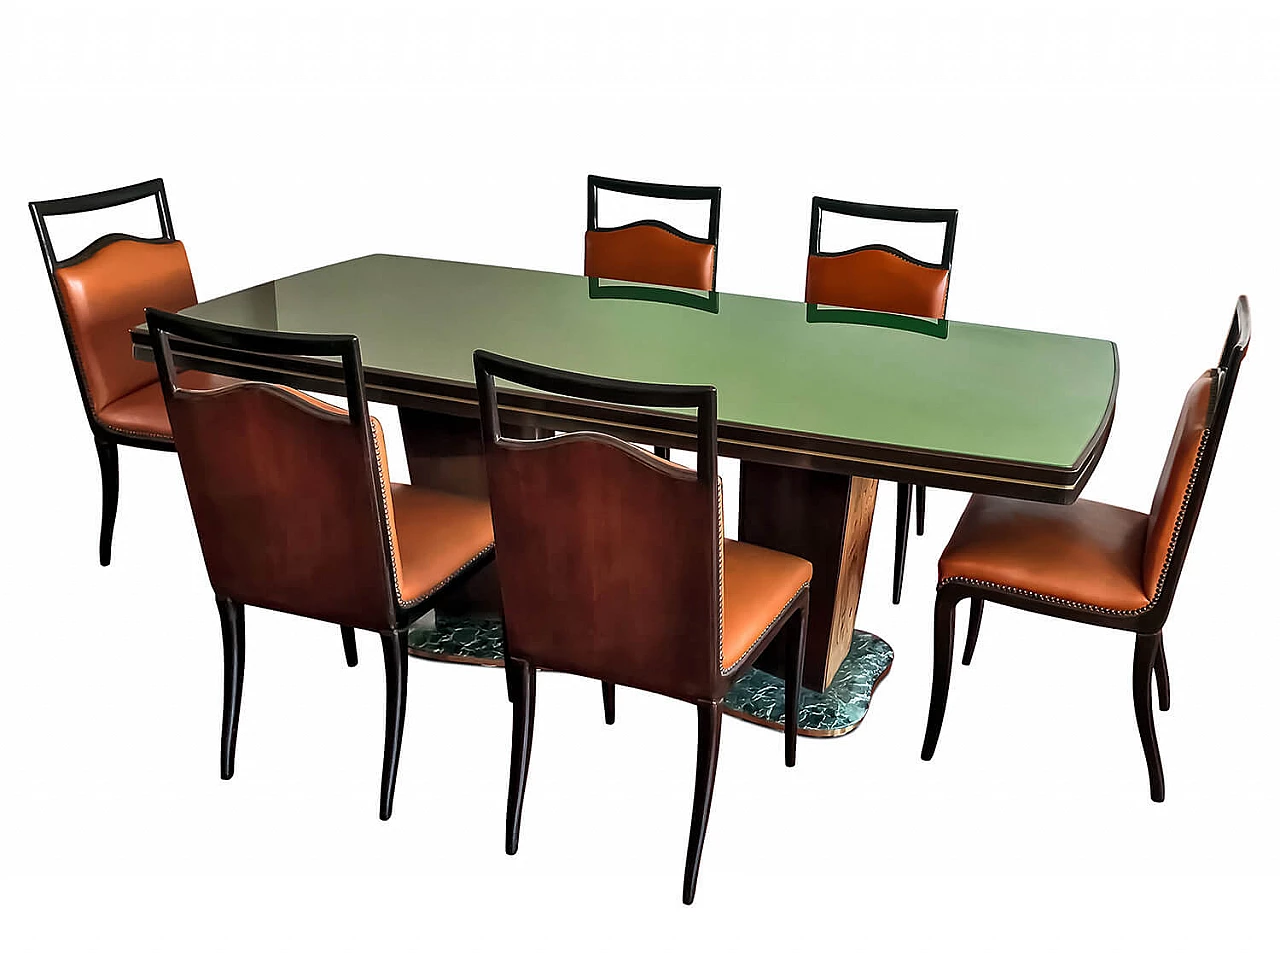 Deco style dining table and chairs by Vittorio Dassi, 1950s 1221556